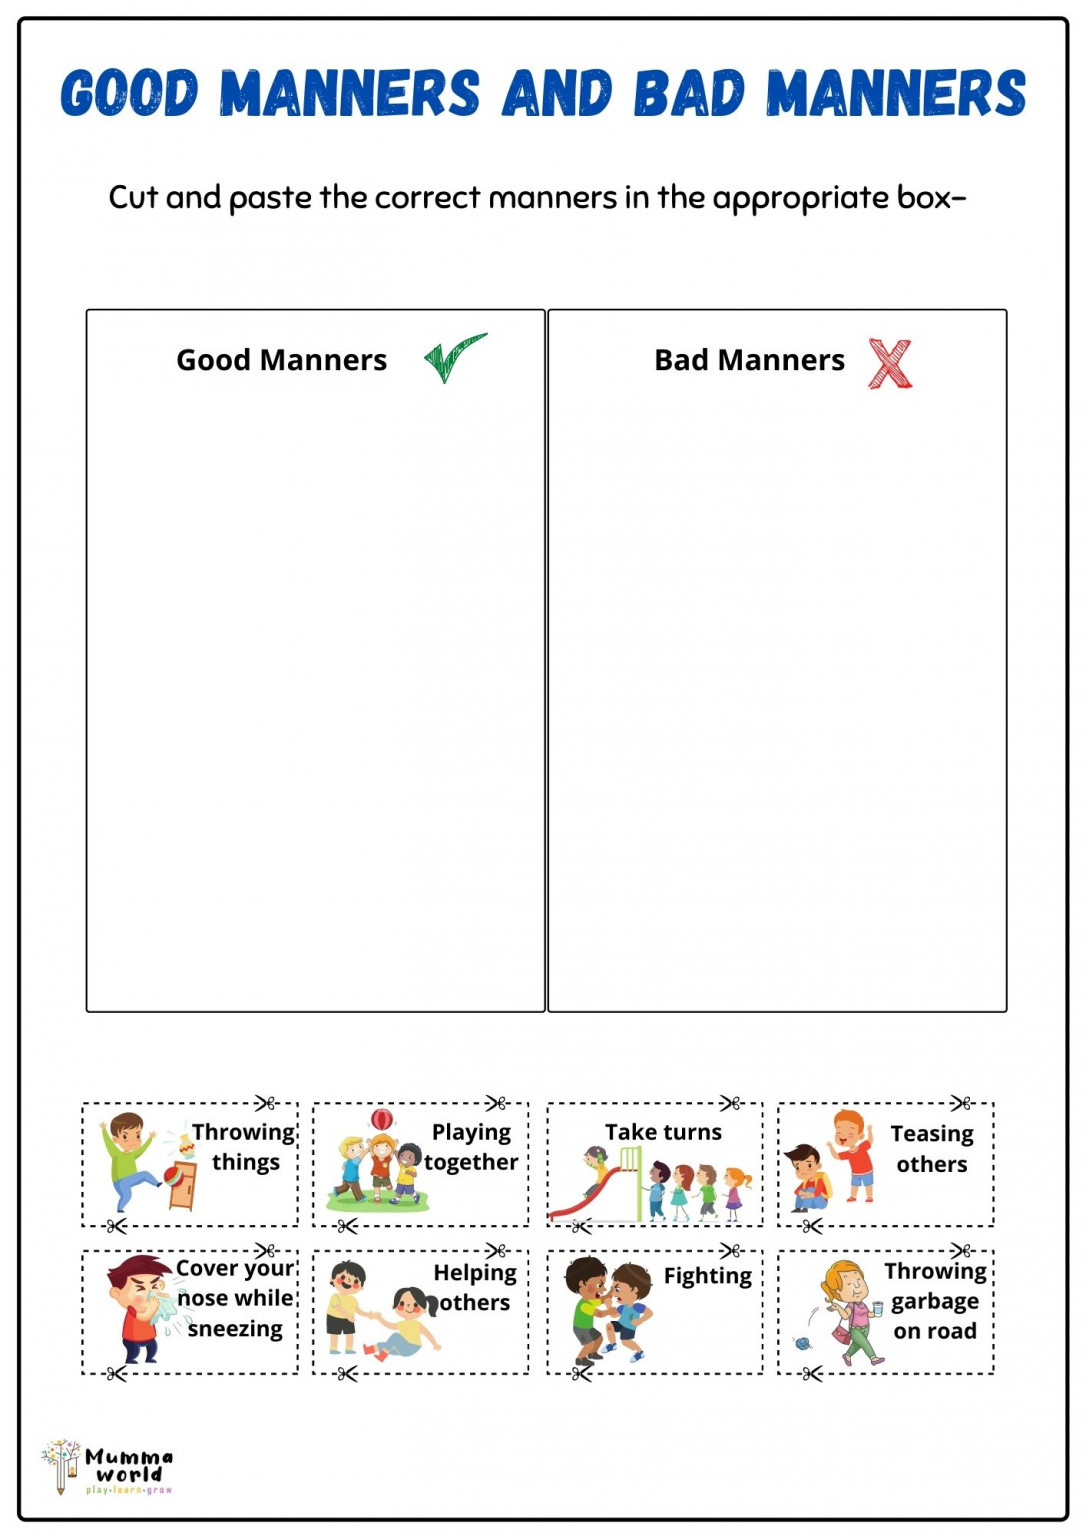 worksheets-archives-page-8-of-24-mumma-world